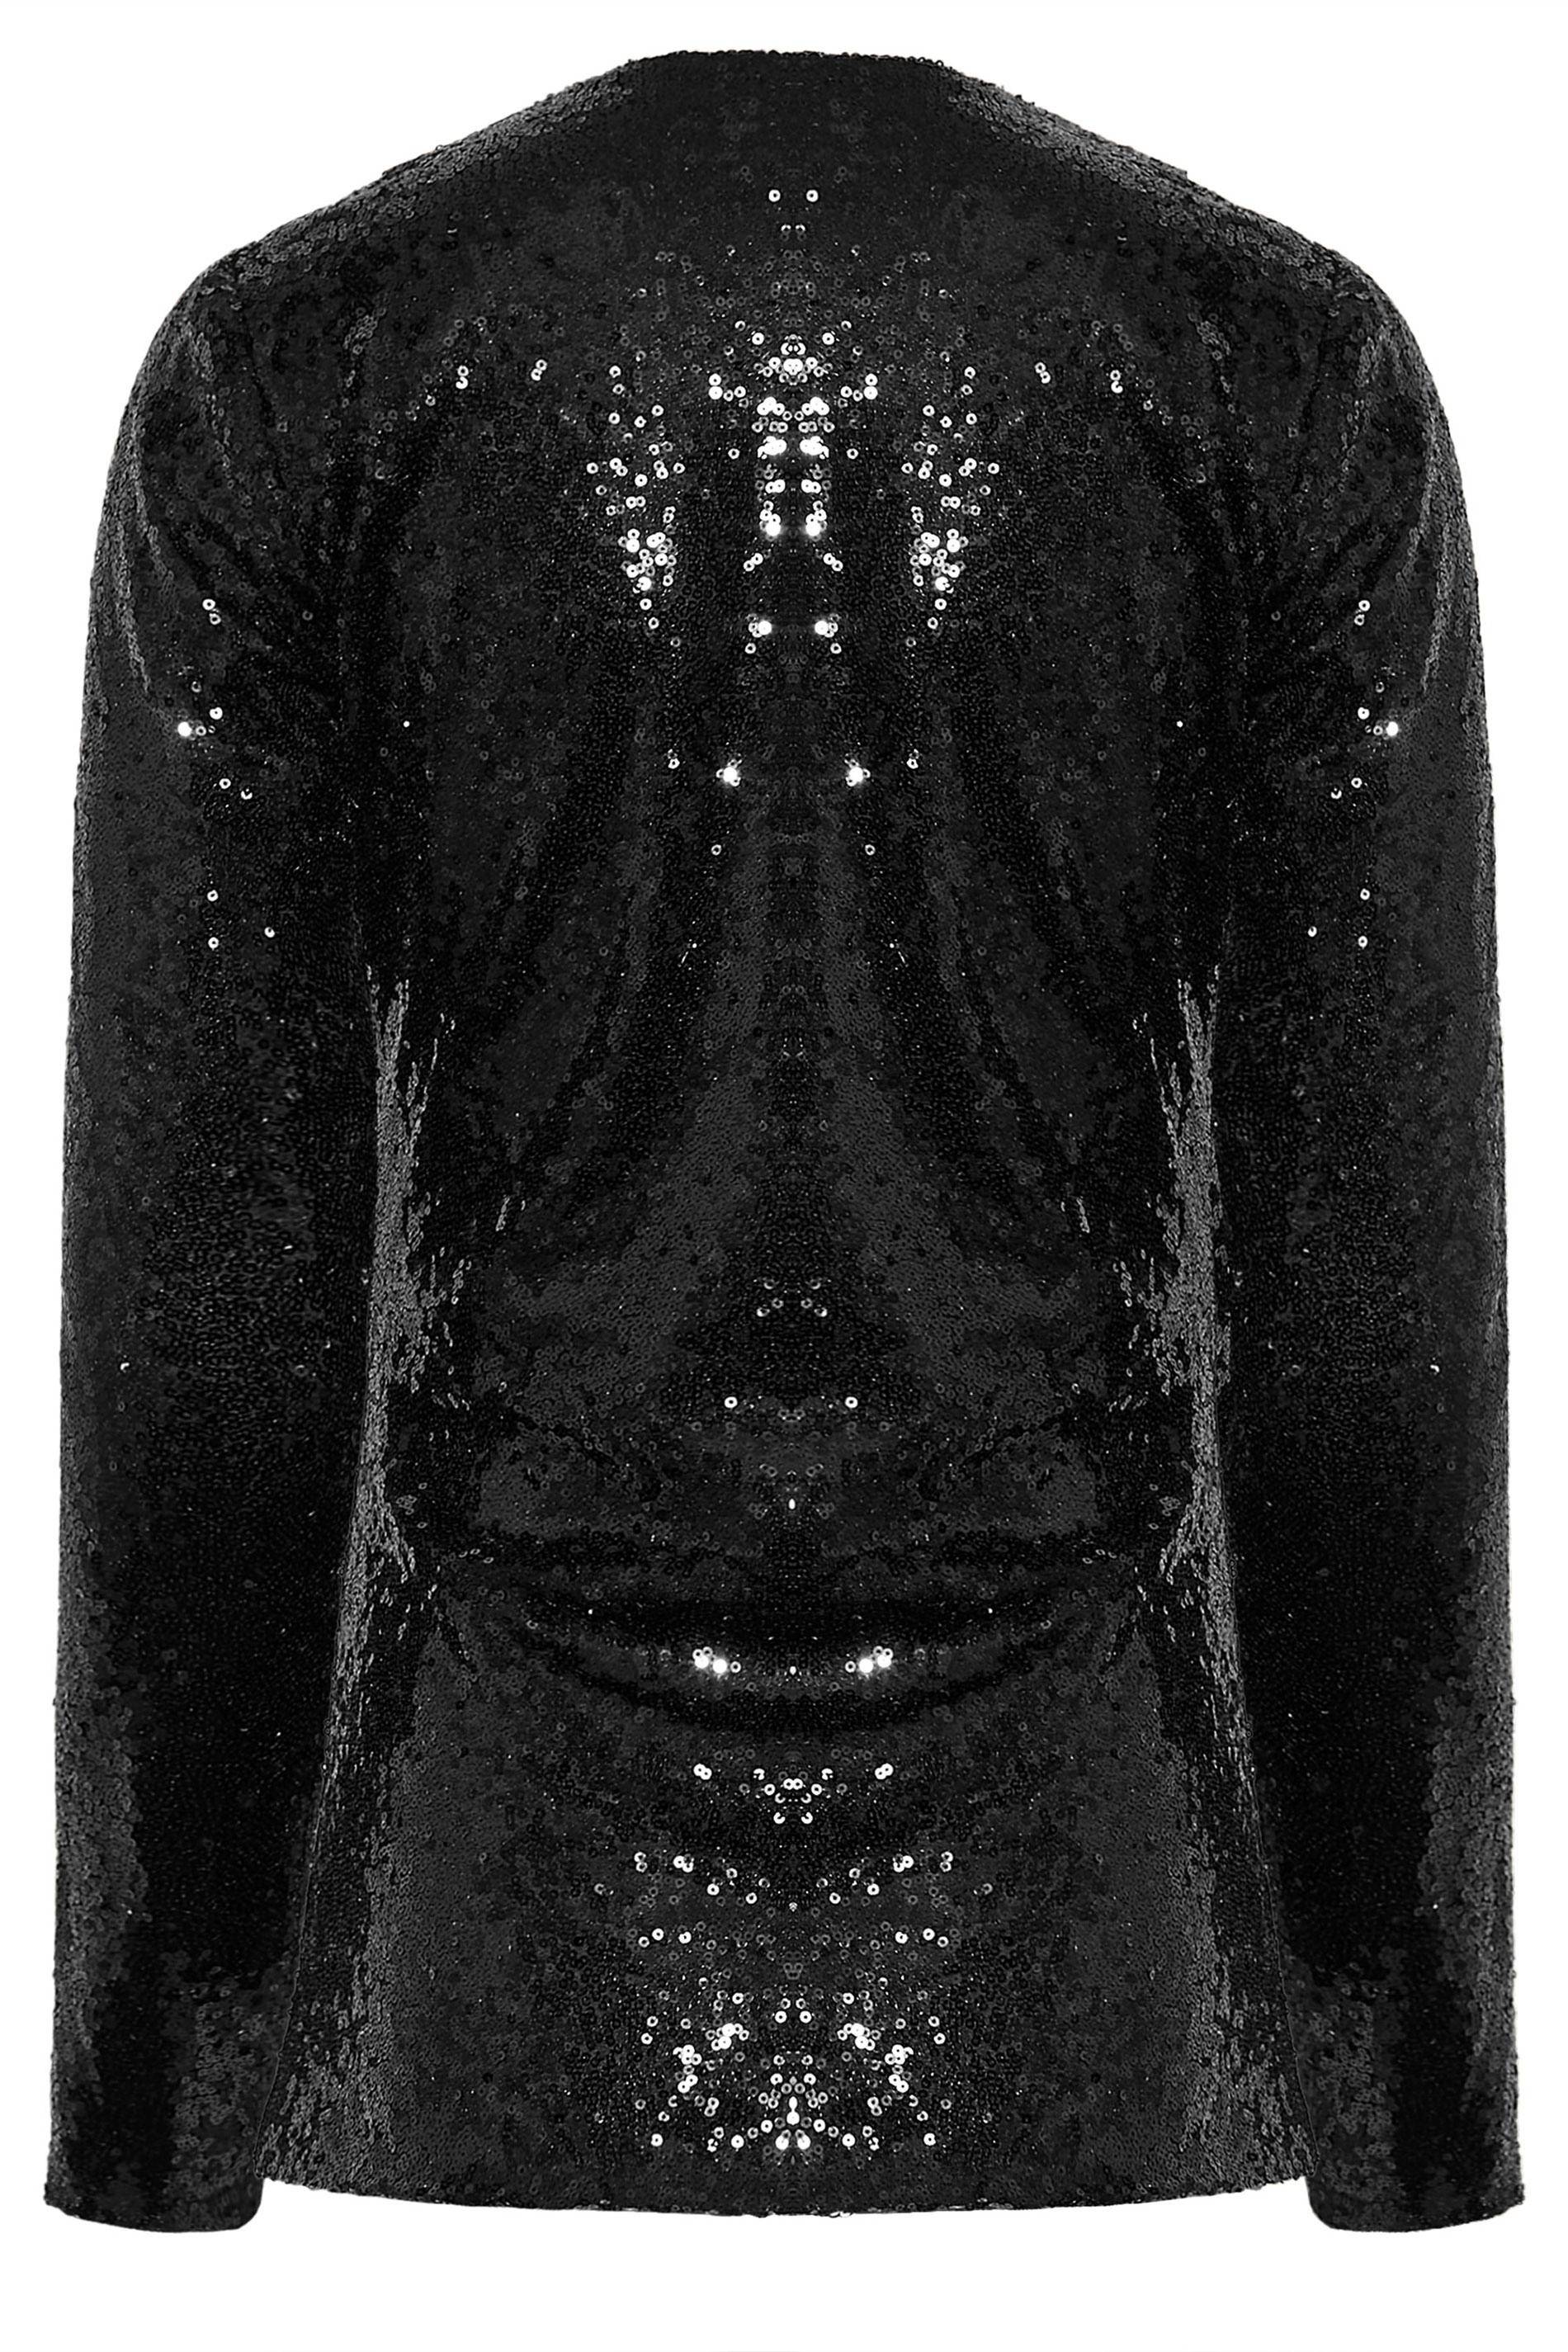 LTS Tall Women's Black Sequin Embellished Wrap Top | Long Tall Sally 3